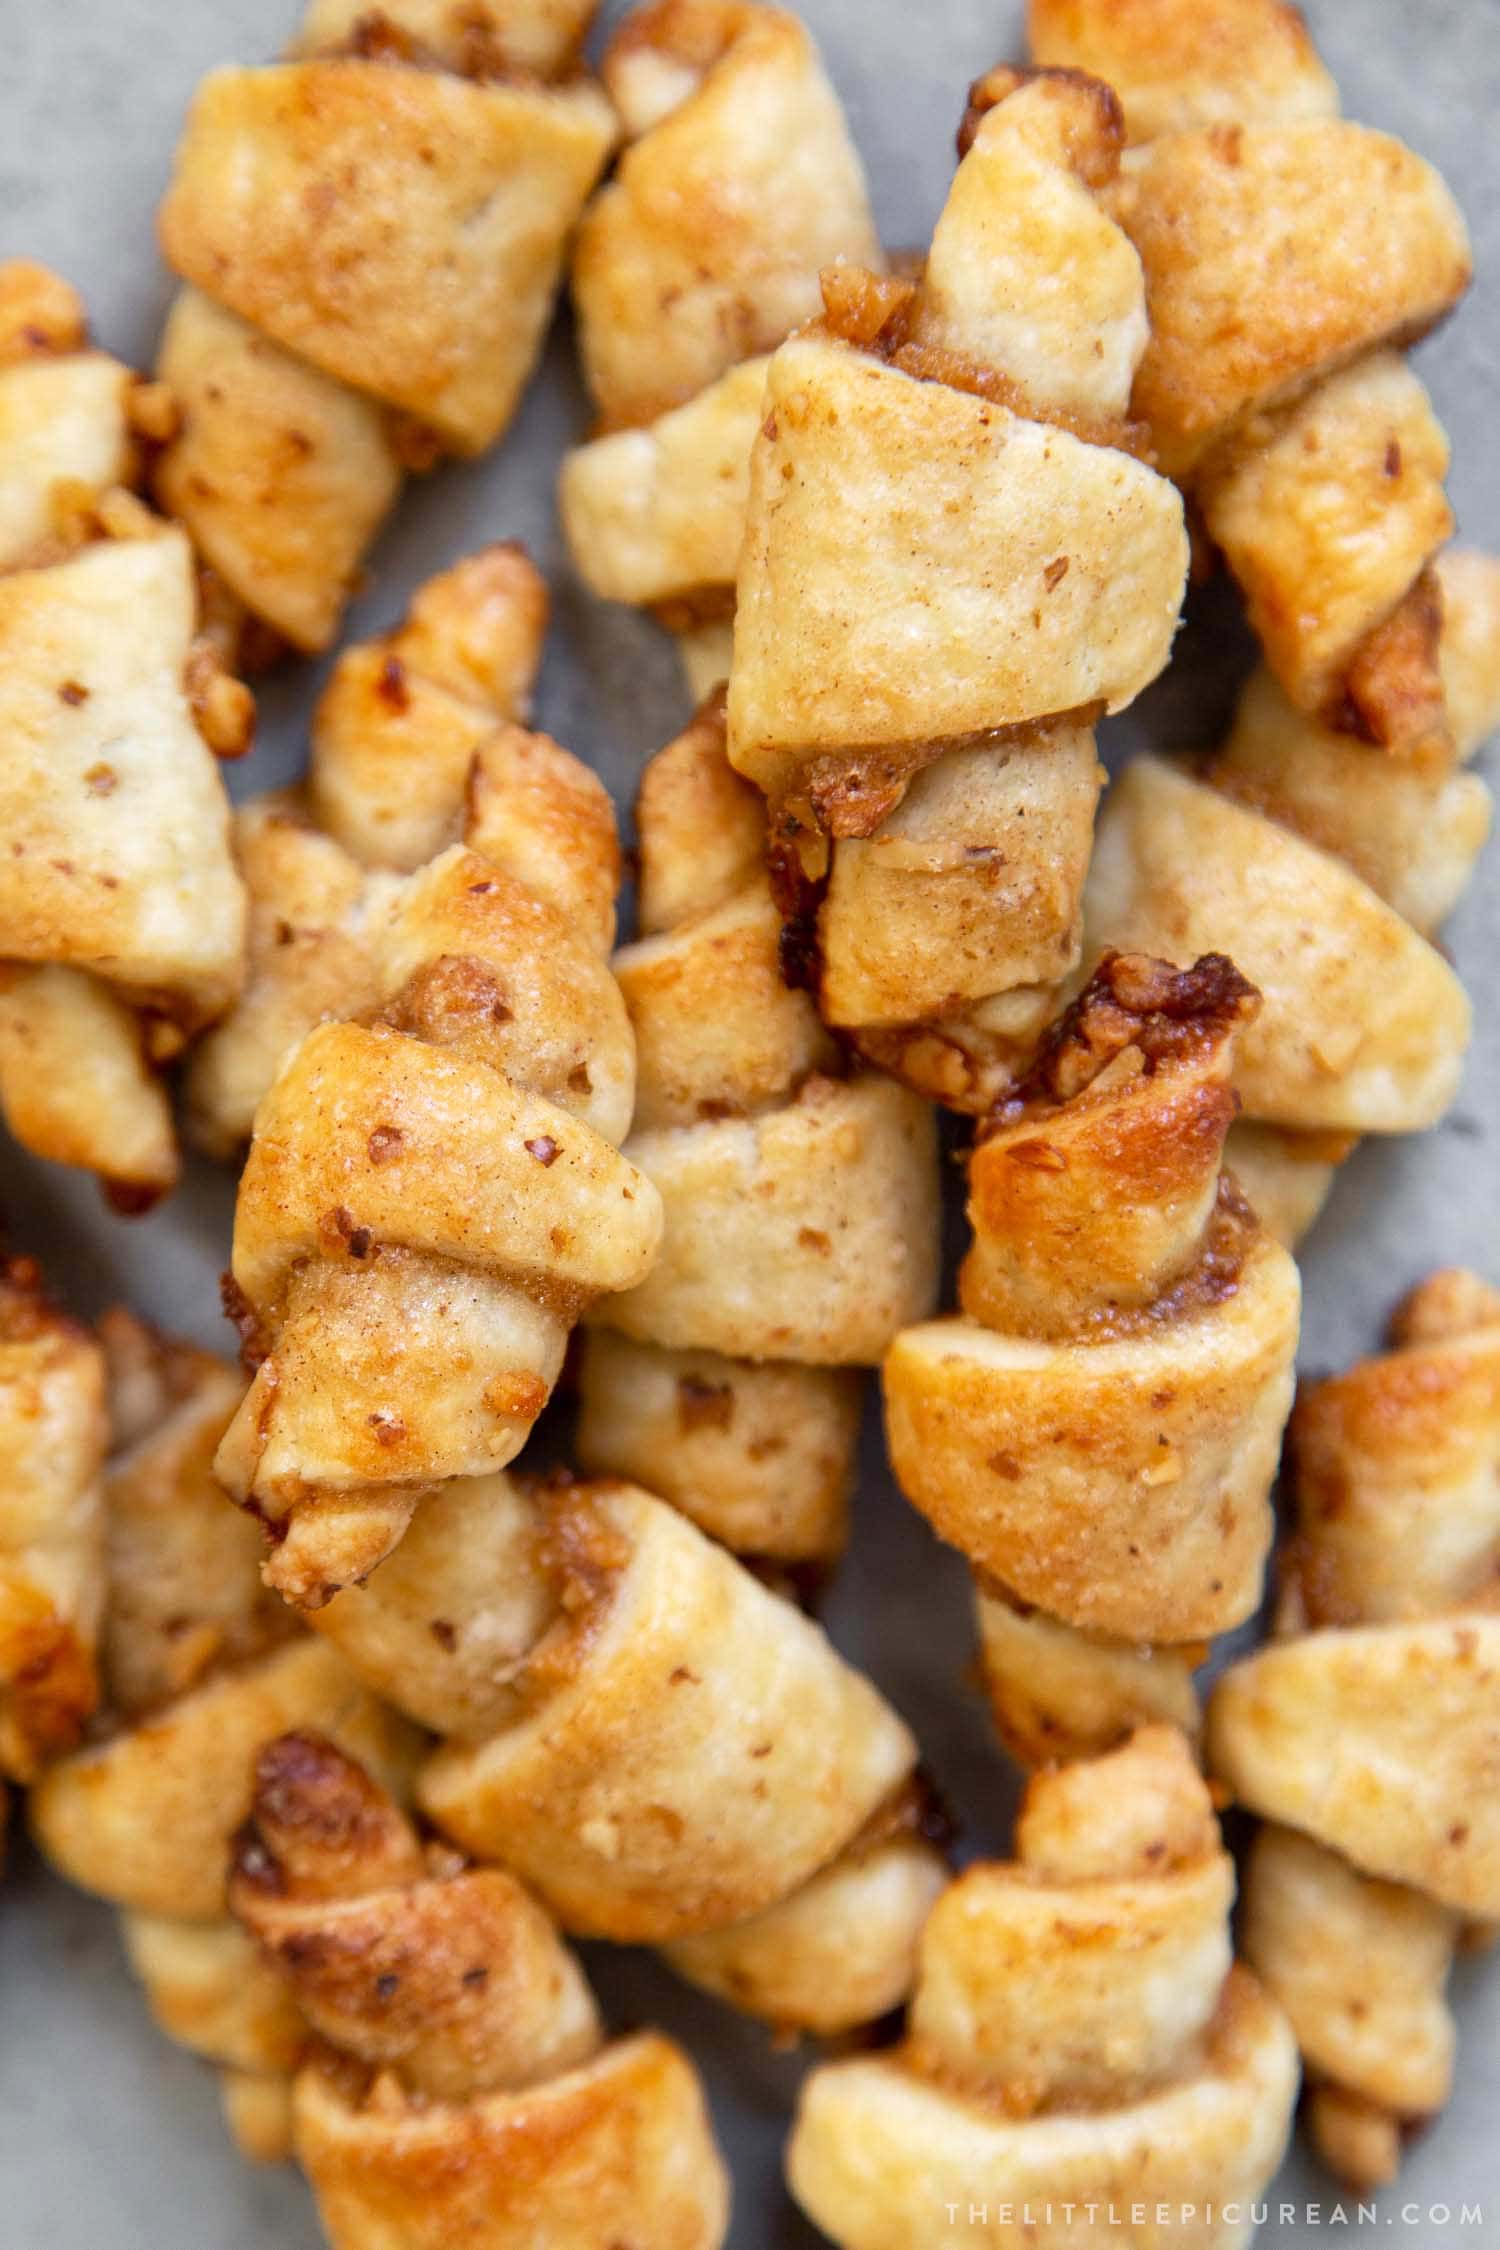 Guava Rugelach. This part cookie, part pastry baked treat is filled with guava jam and chopped walnuts.